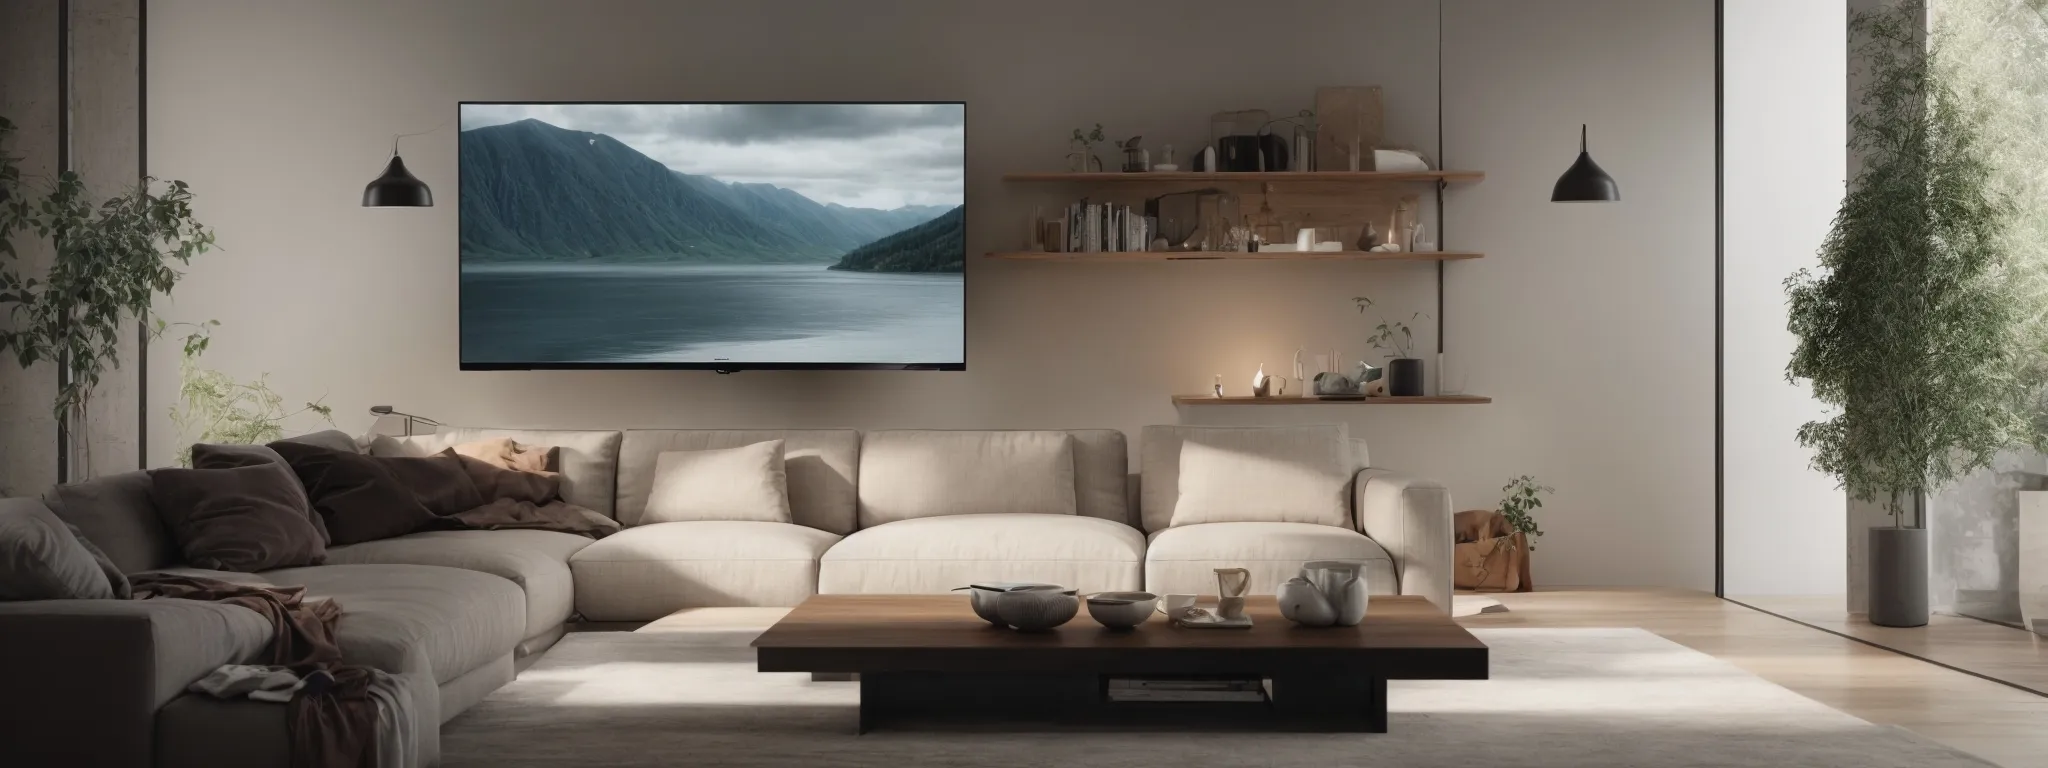 a person sits comfortably on a couch, absorbed in content displayed on a large, sleek smart tv in a minimalist living room.